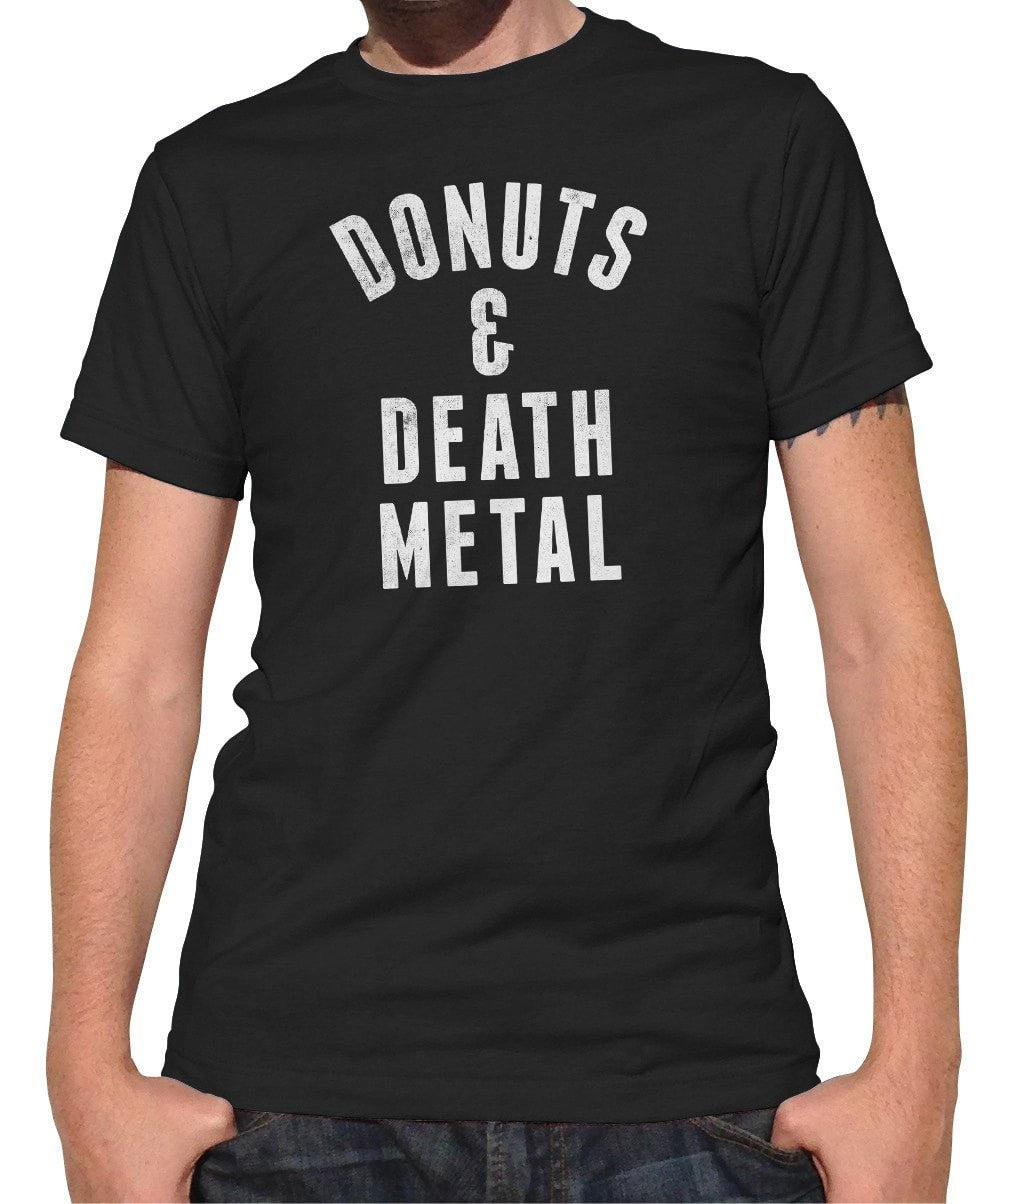 Men's Donuts and Death Metal T-Shirt